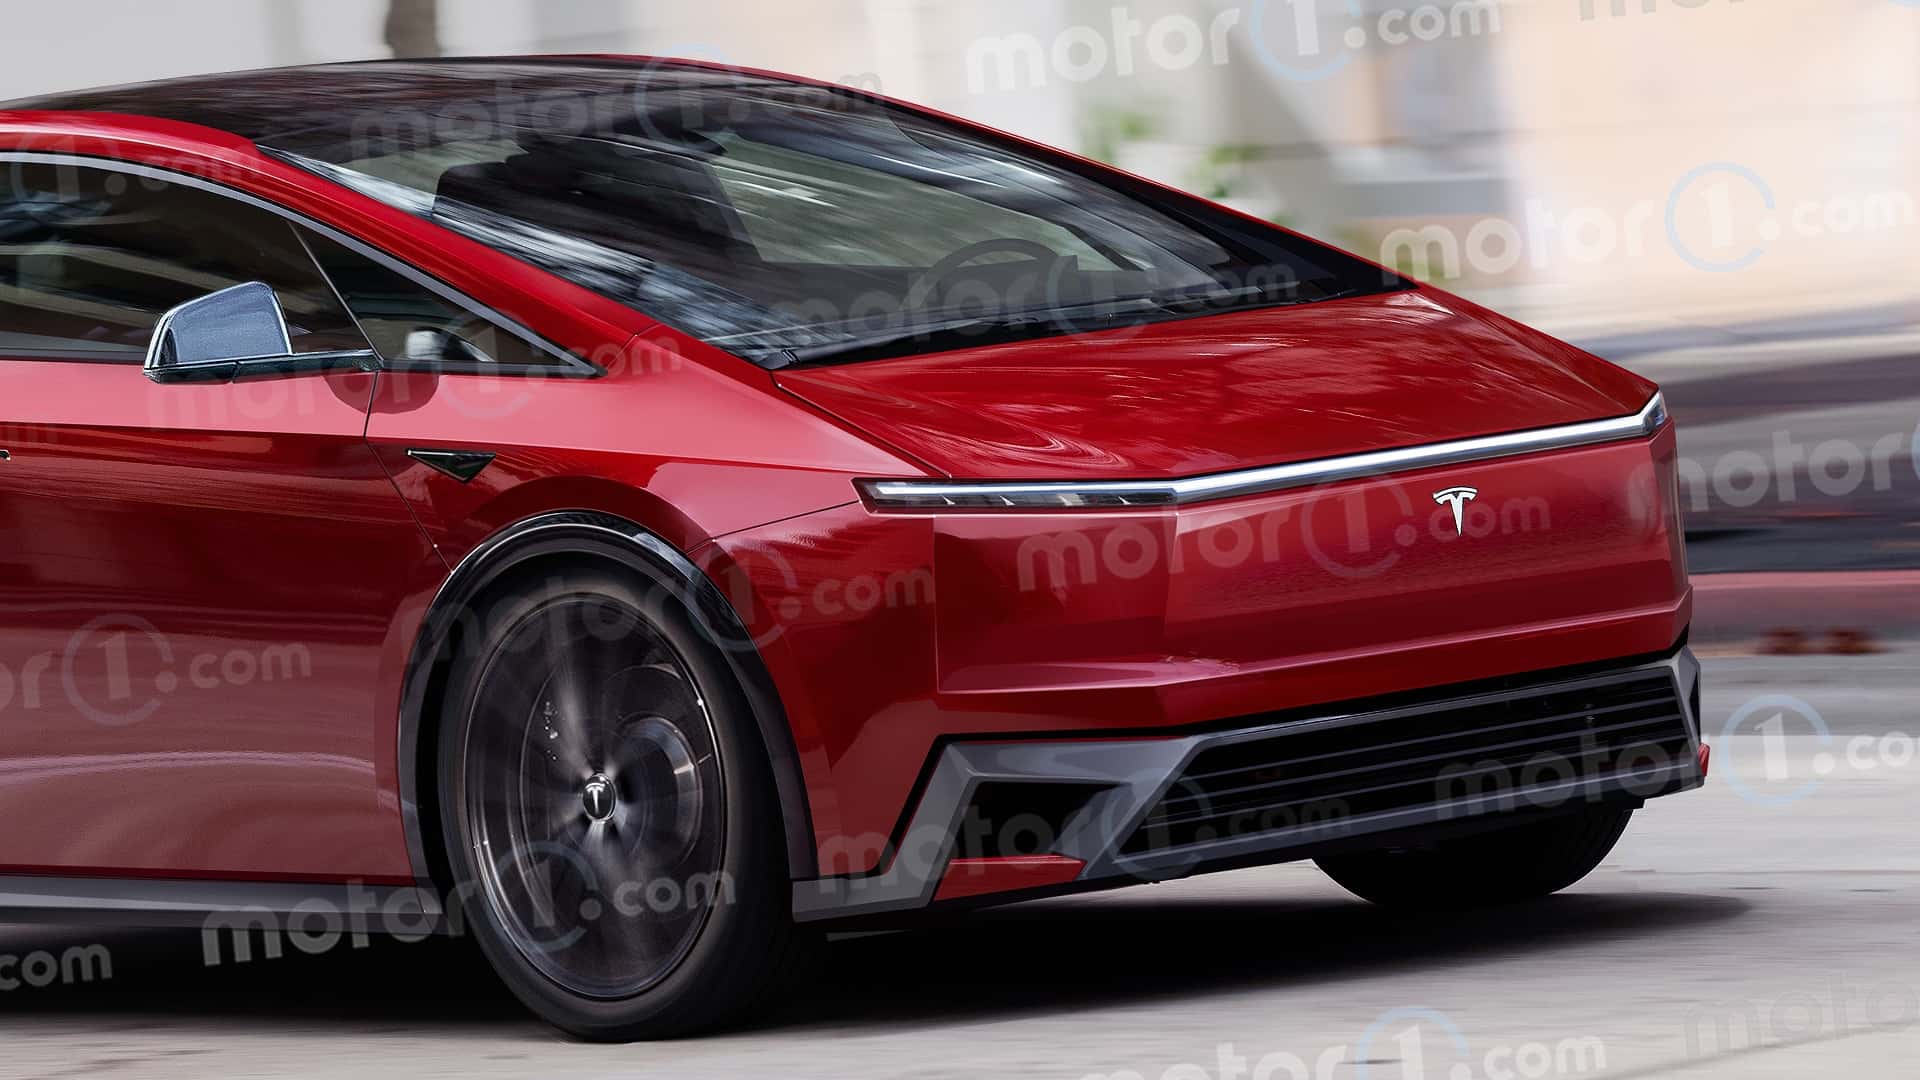 tesla's $25,000 ev rendered with 'futuristic' cybertruck cues